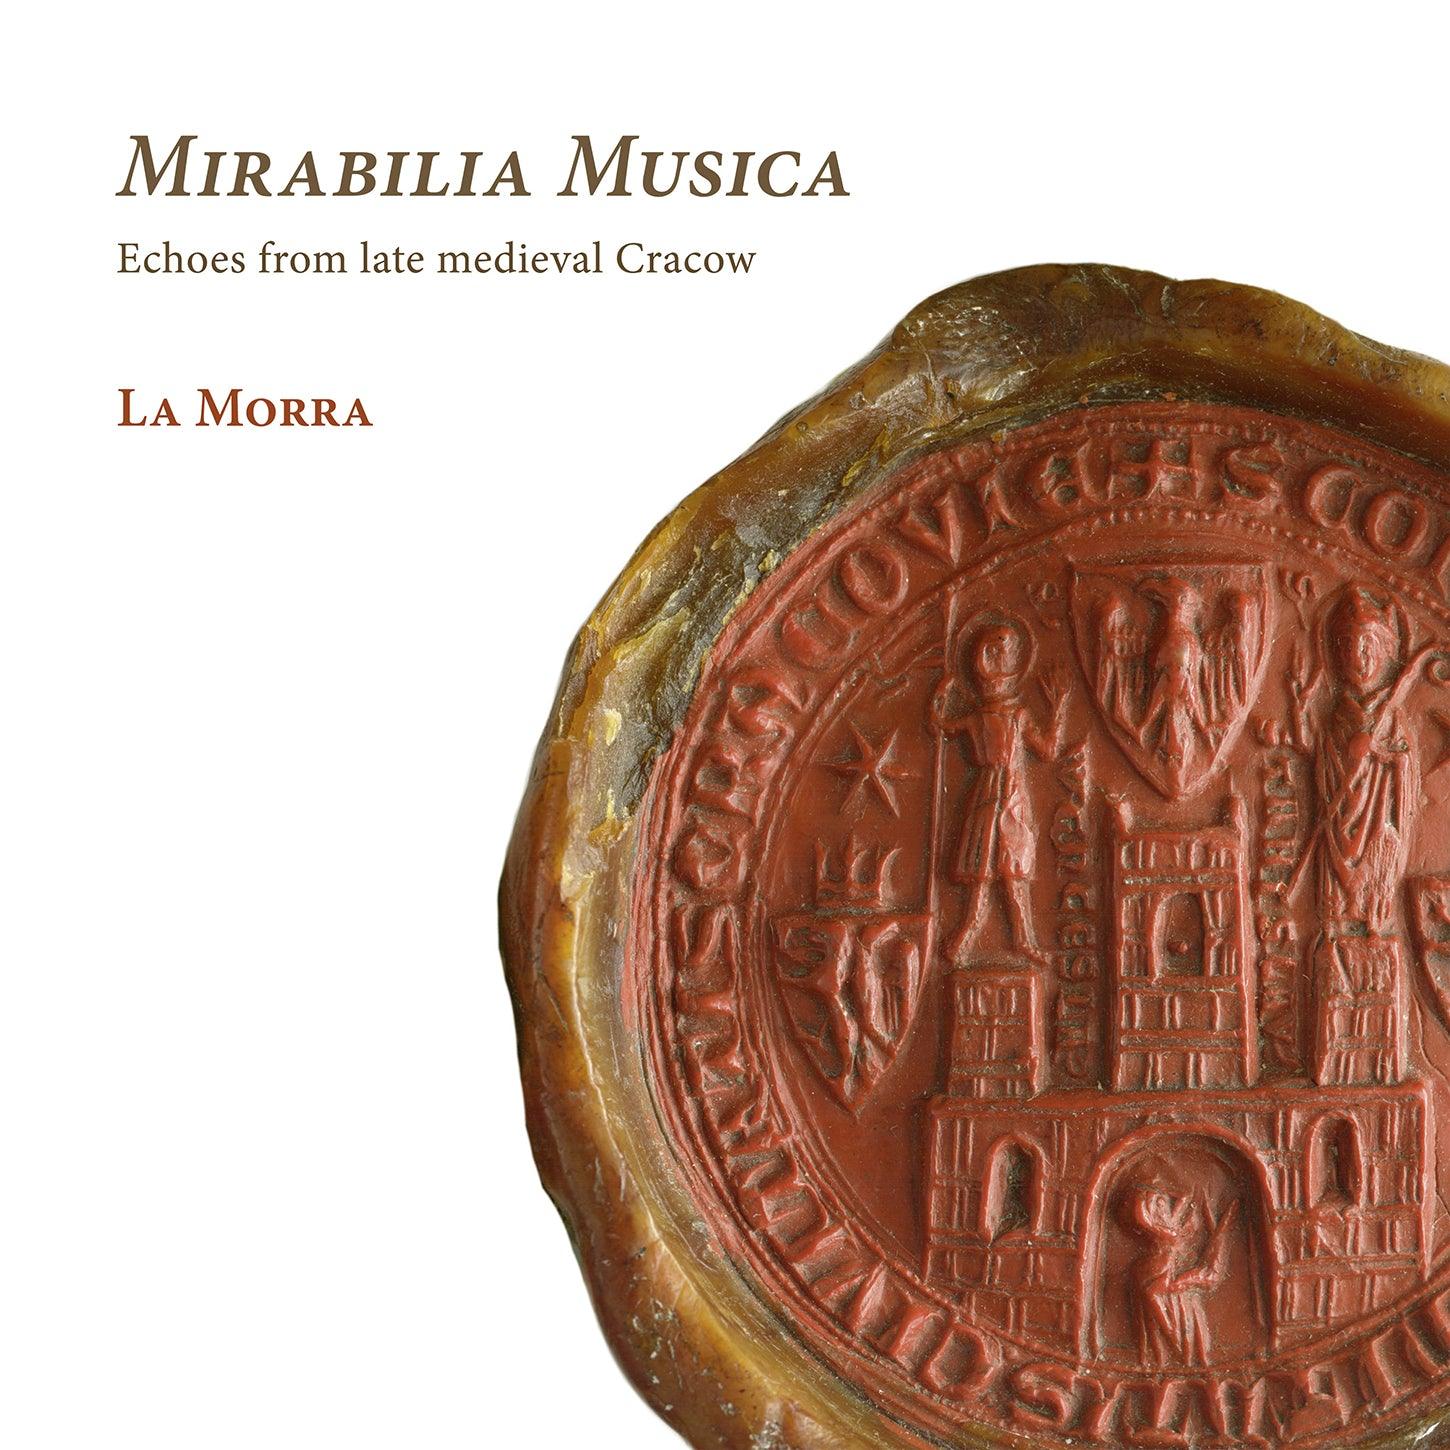 Mirabilia Musica: Echoes From Late Medieval Cracow / La Morra - ArkivMusic